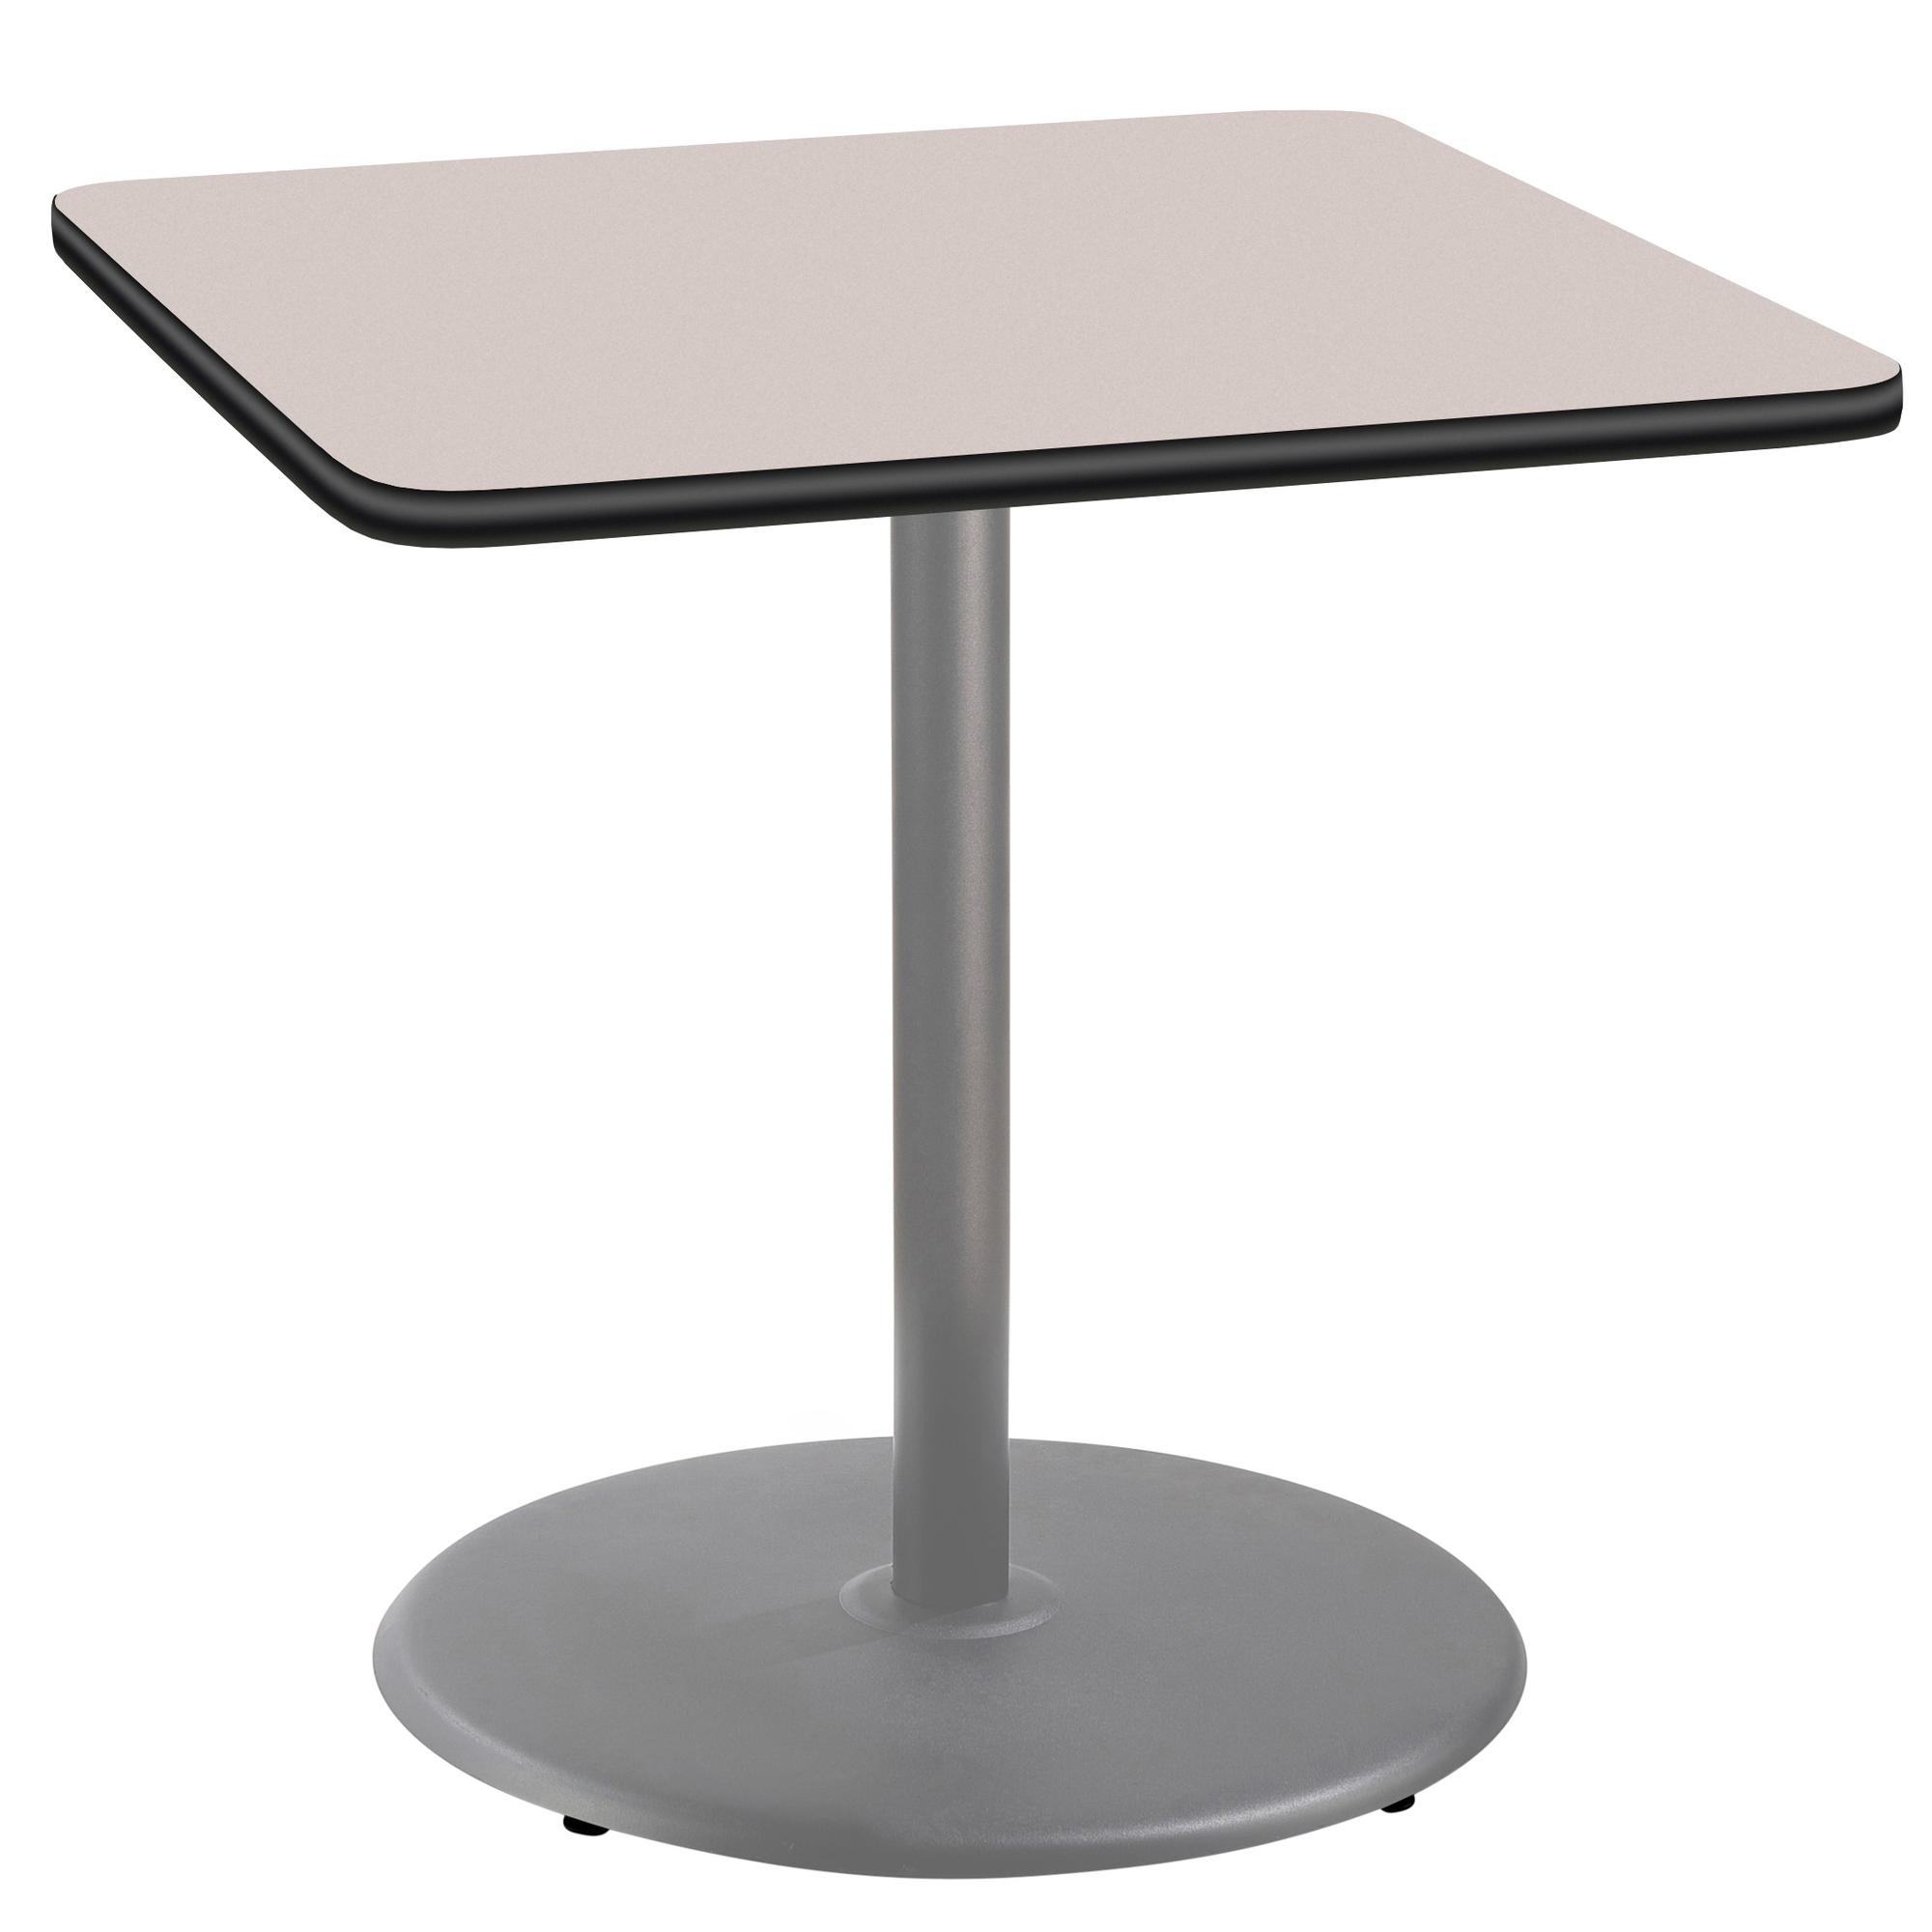 "National Public Seating, Cafe Table, 36x36x36 Square ""R"" Base, Height 36 in, Model CTG33636RCPBTMGY"